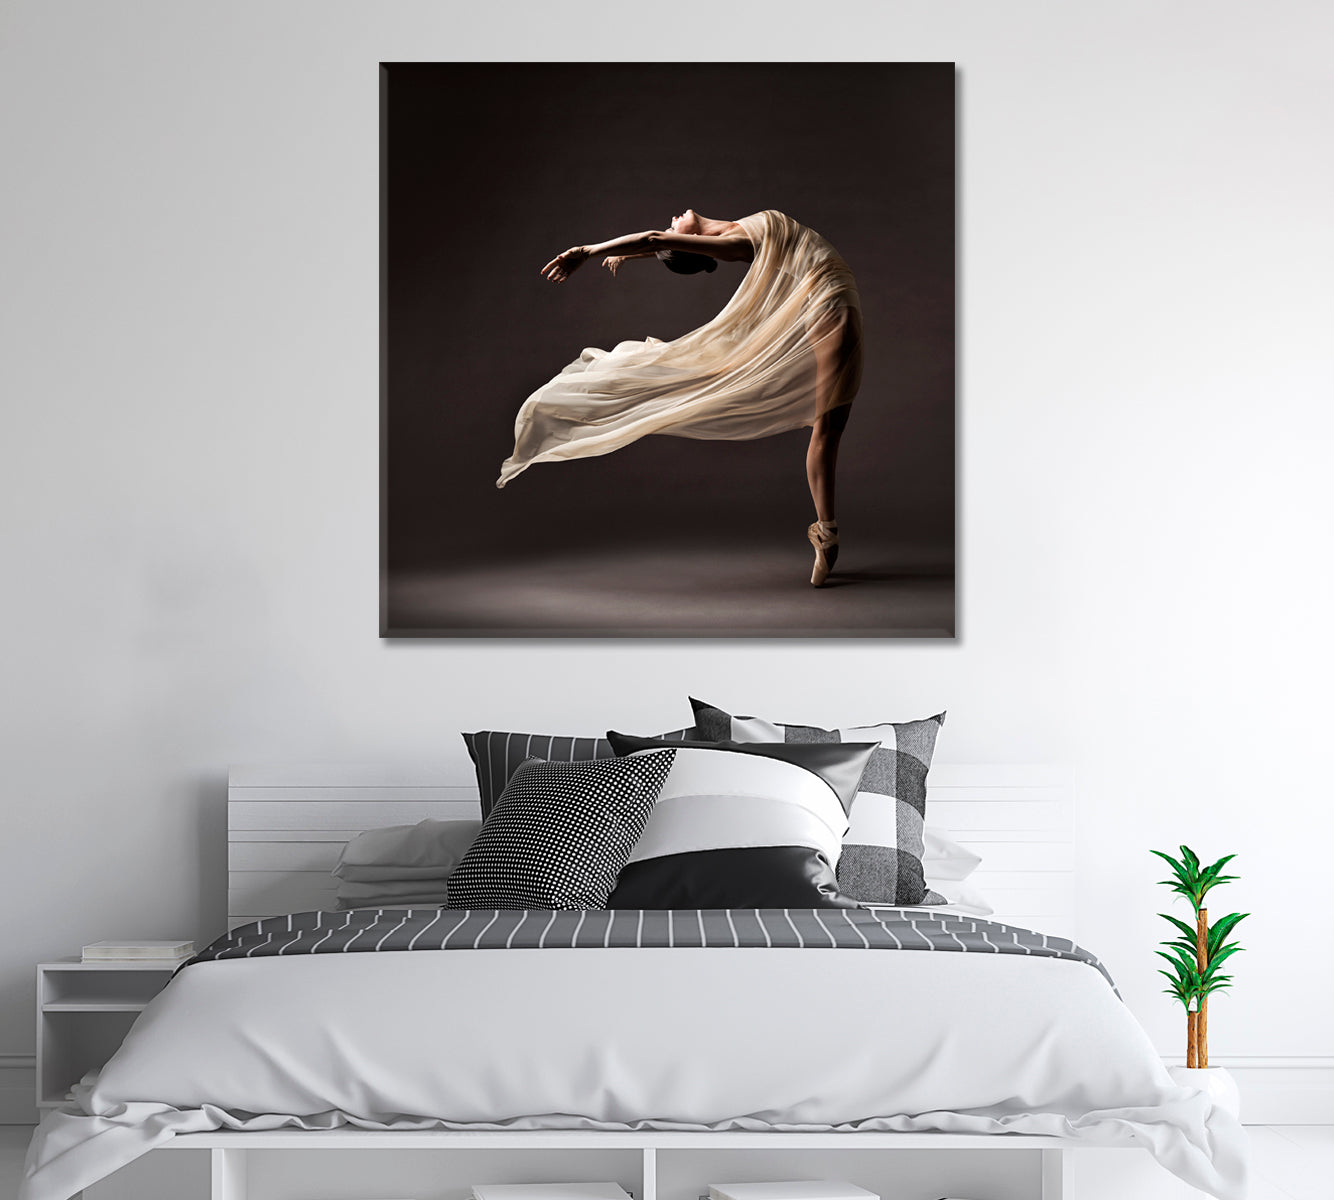 Flexible Ballerina in Delicate Silk Dress and Pointes Canvas Print-Canvas Print-CetArt-1 panel-12x12 inches-CetArt